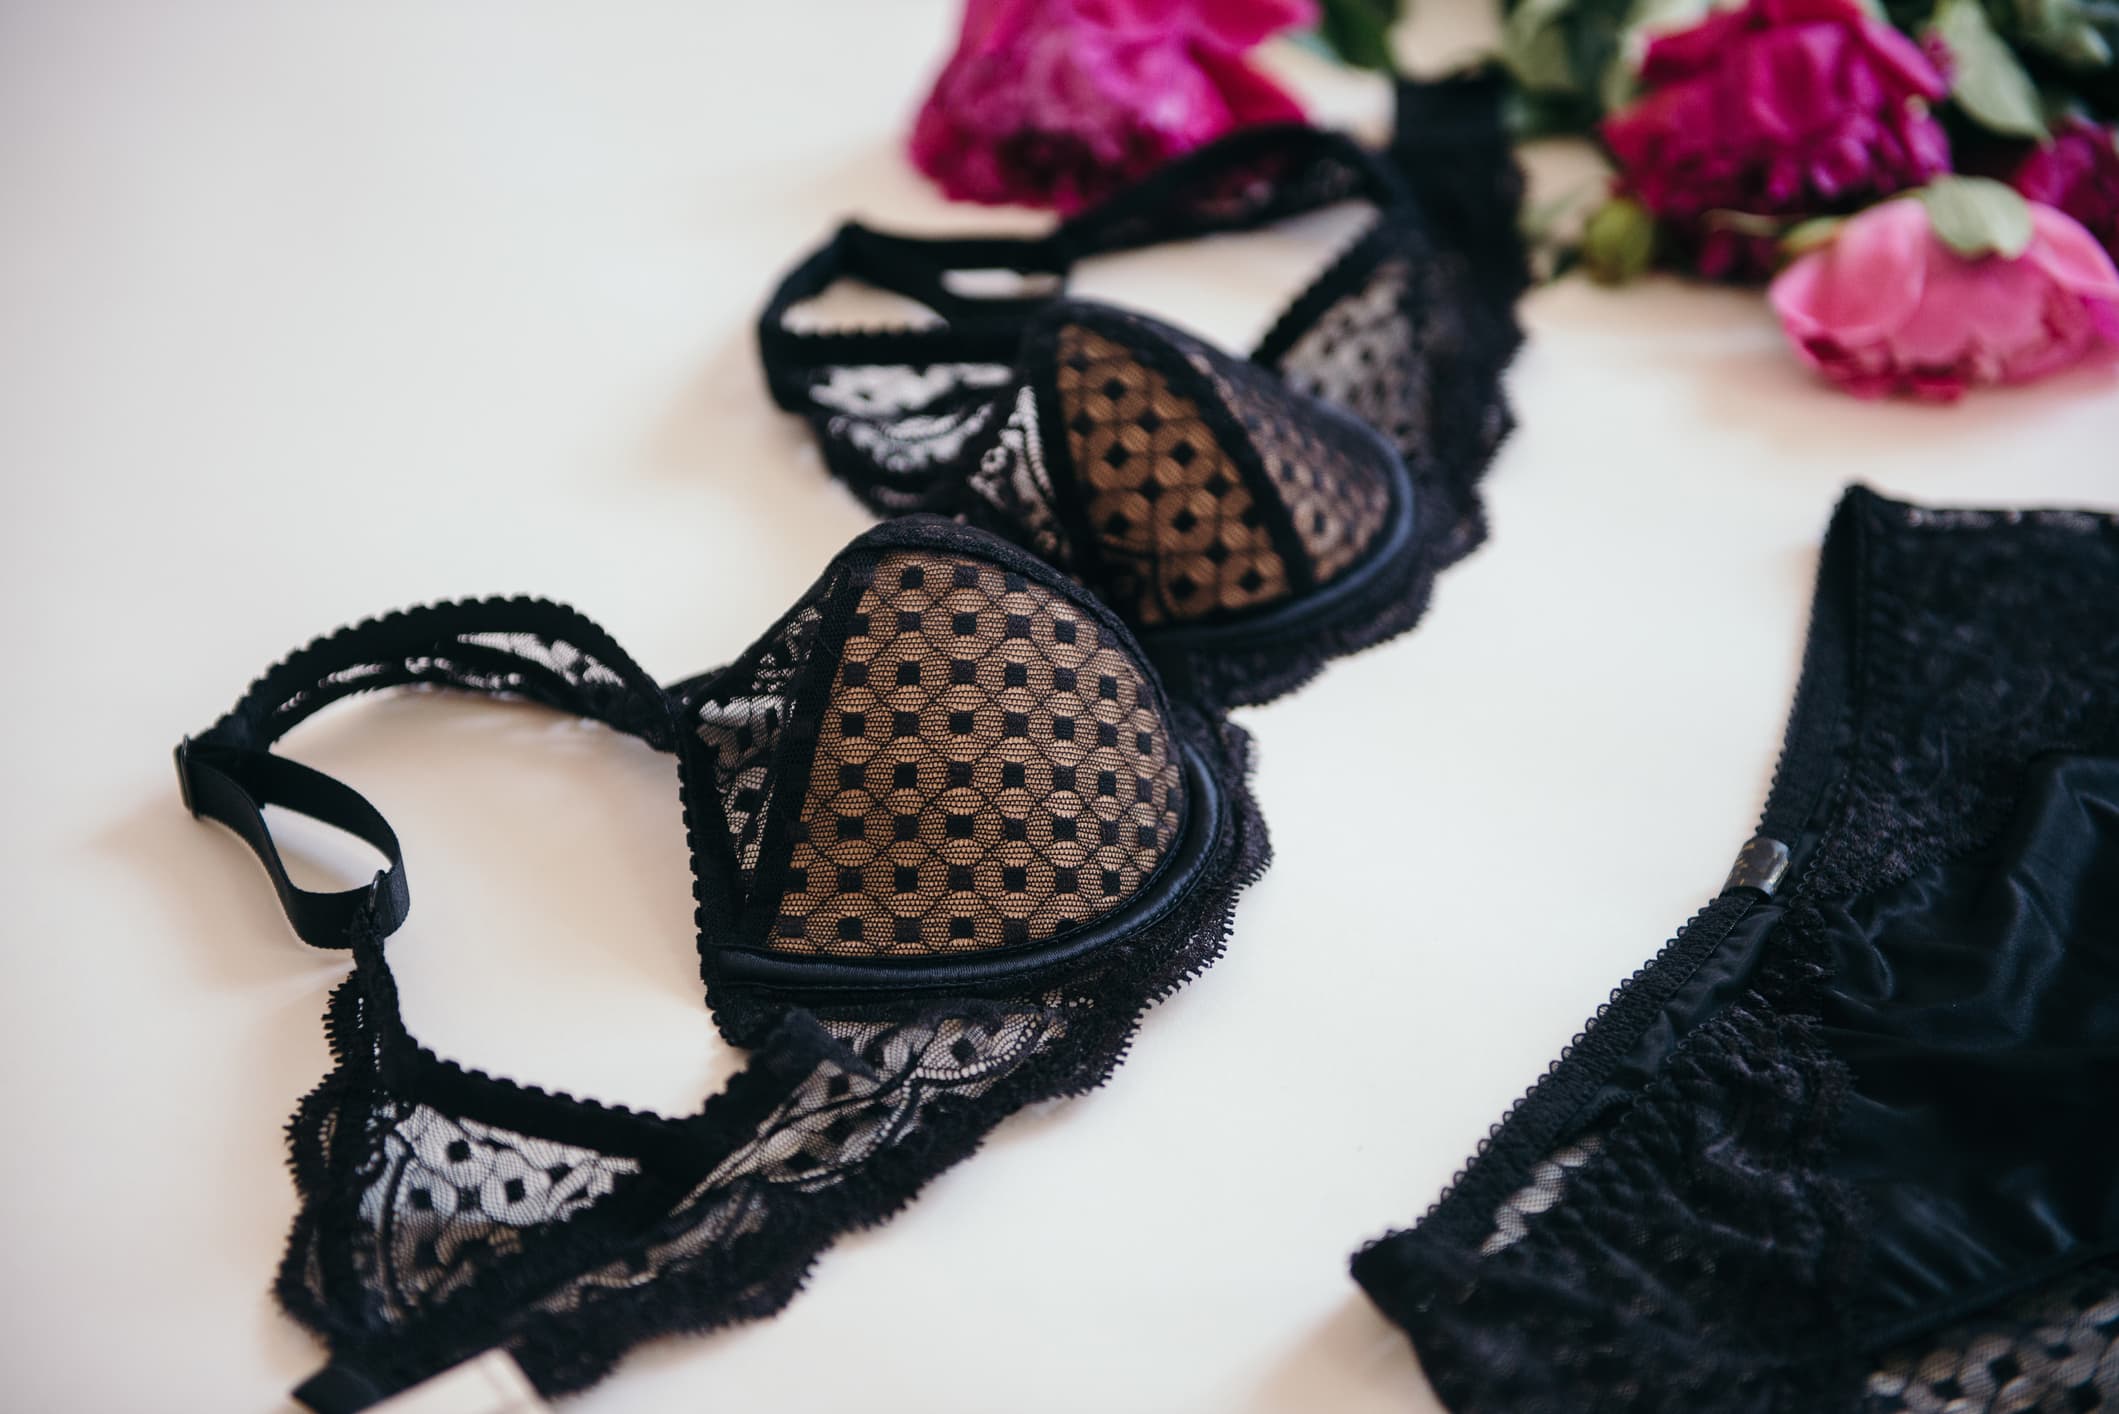 ms-unapologetic-lifestyle-blog-random-how-to-wear-lingerie-in-public.jpg